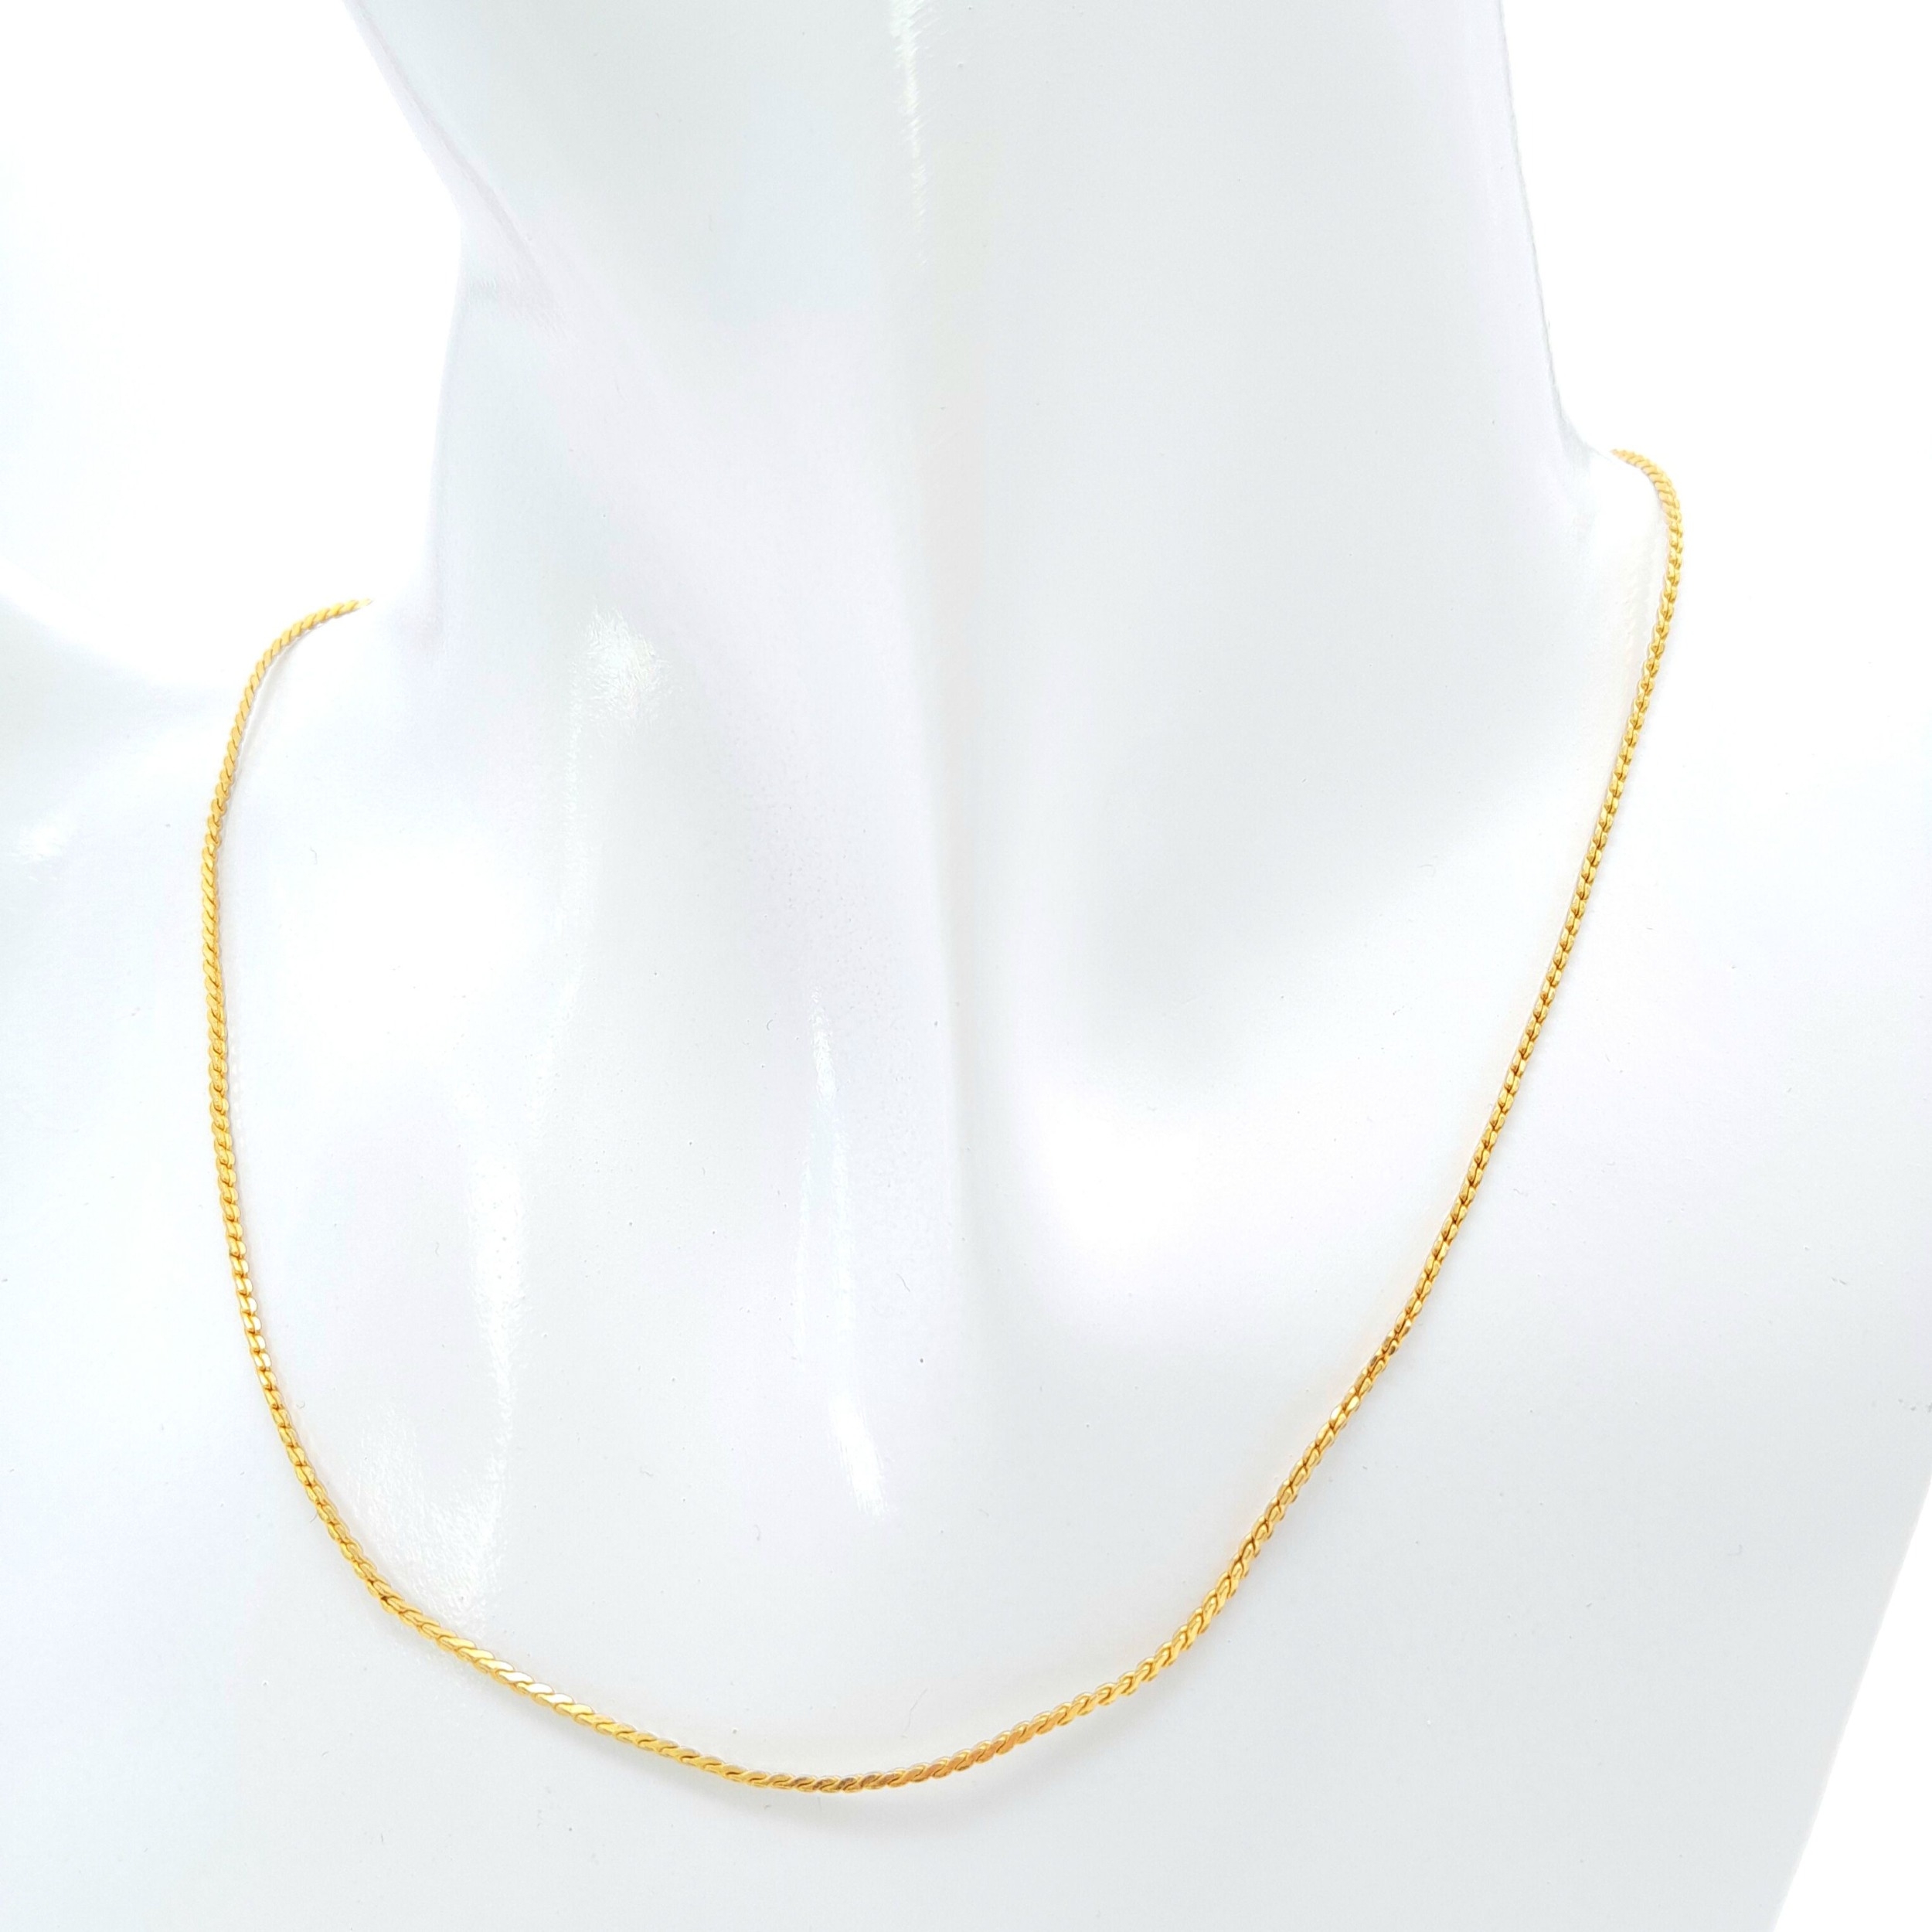 A 9 k yellow gold chain necklace, length: 37 cm, weight: 2.3 g.